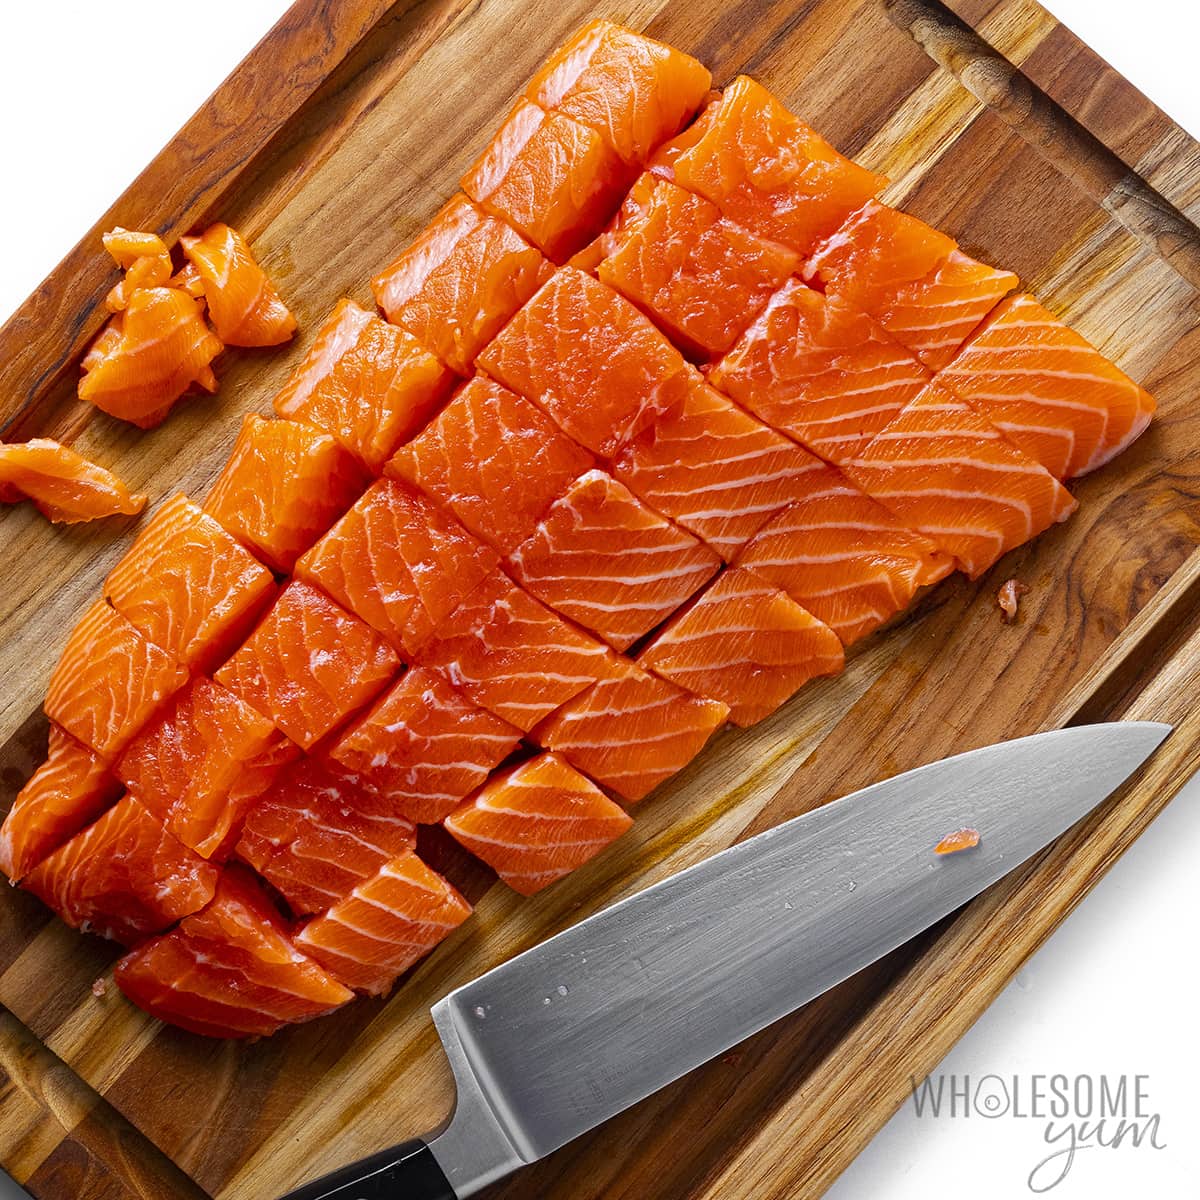 Slicing salmon into cubes.